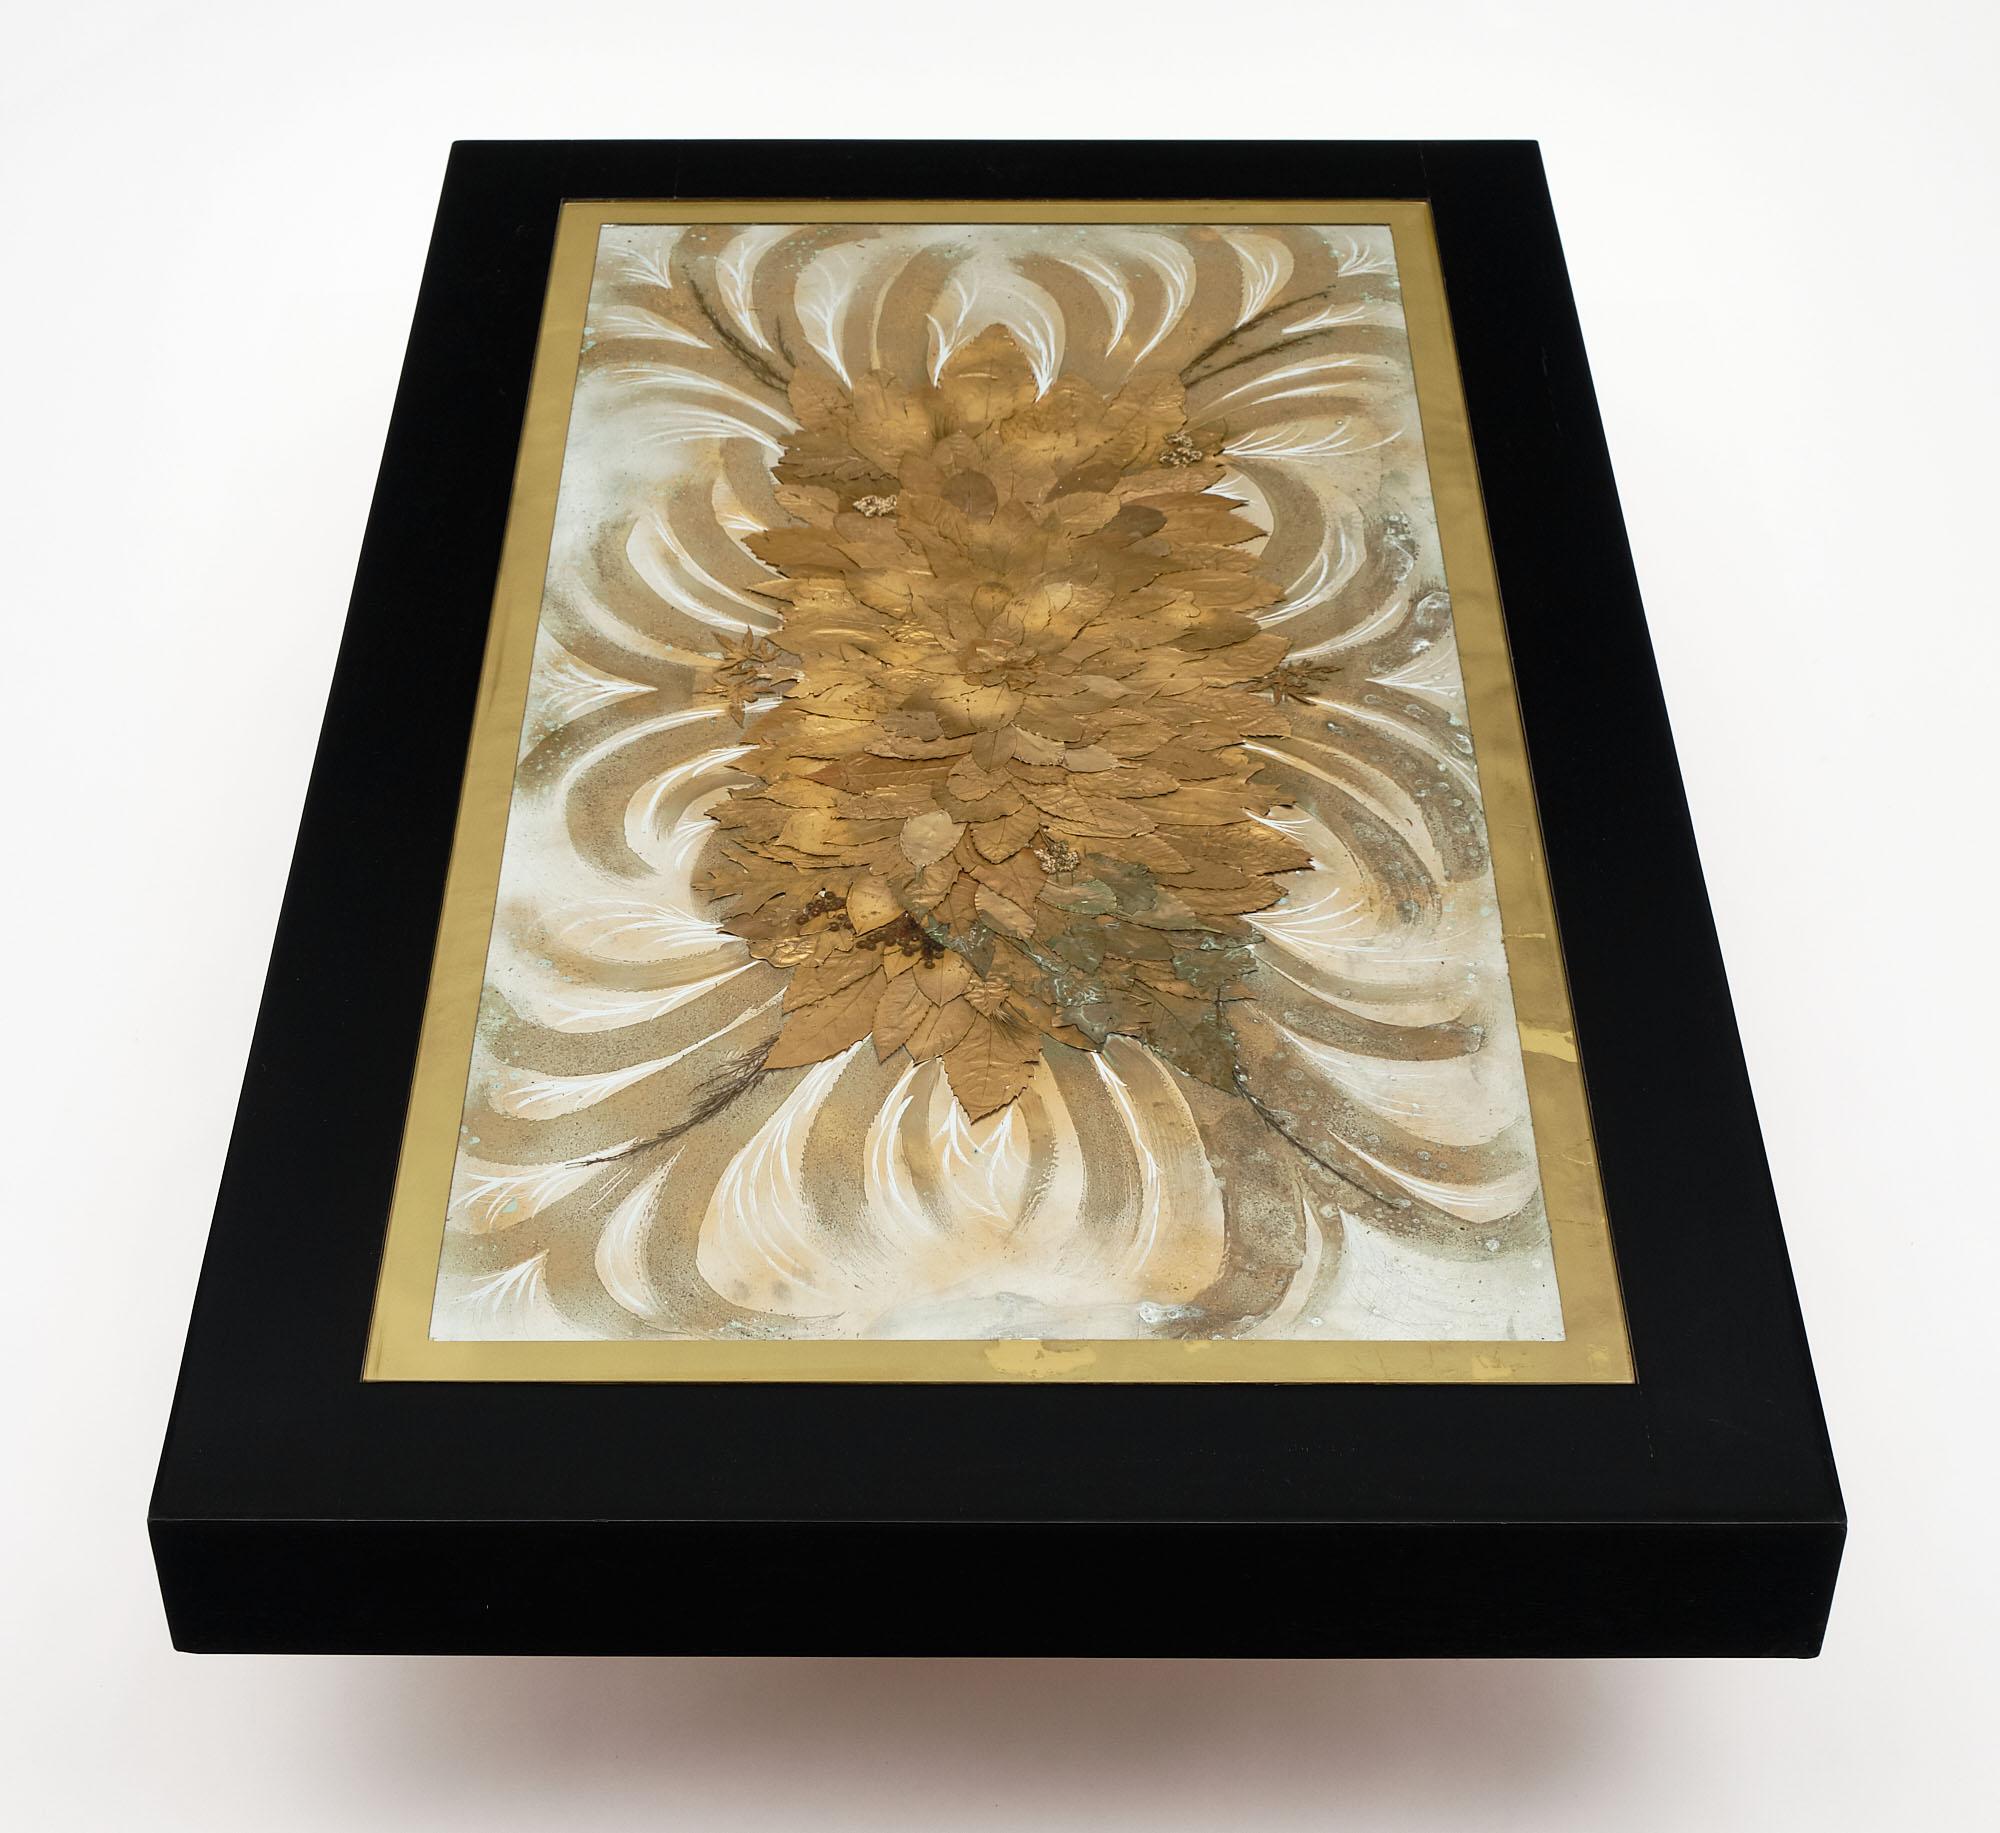 French Art Deco ebonized wood coffee table with glass top. It is made of ebonized oak and features gold leafed edges to the glass covering a gold leaf and natural decor decoration on aluminum. This piece of art is signed by N. Maillard.